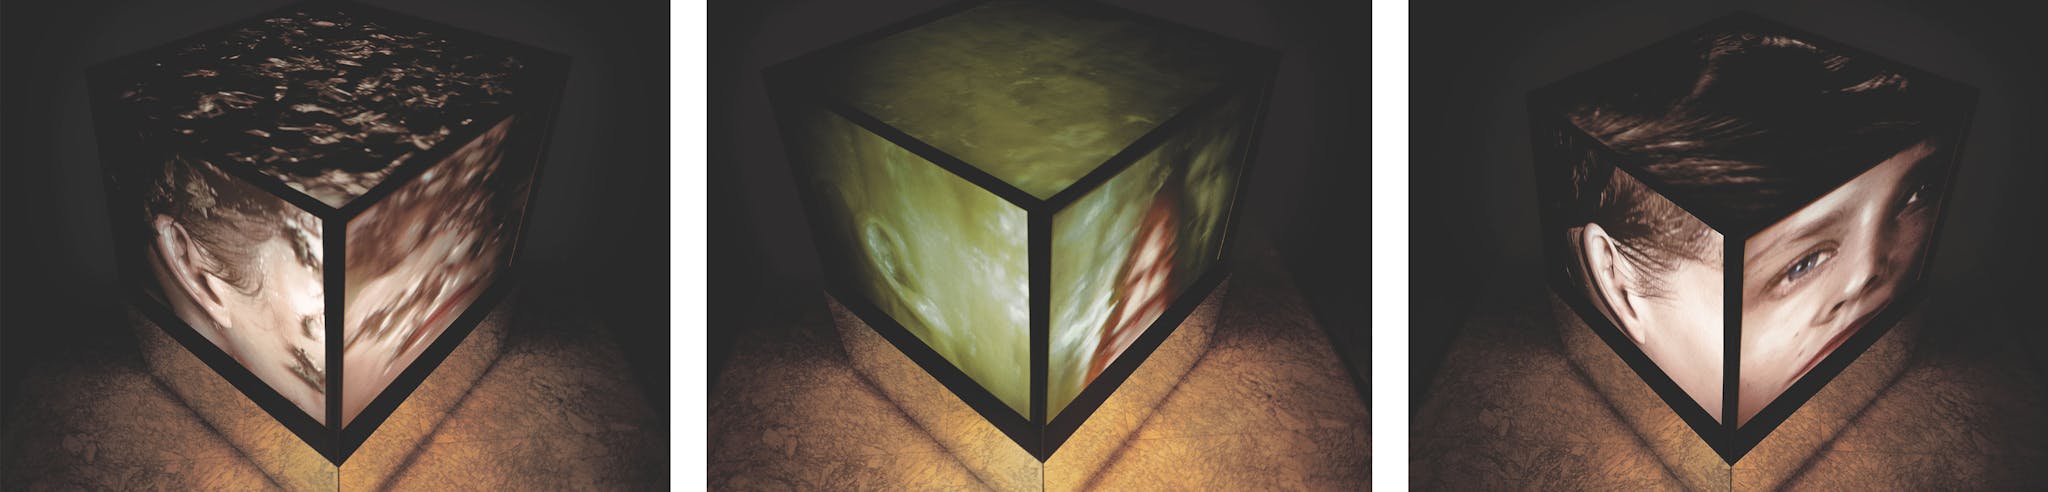 Three side-by-side images of a box with an image projected around all sides of each box.